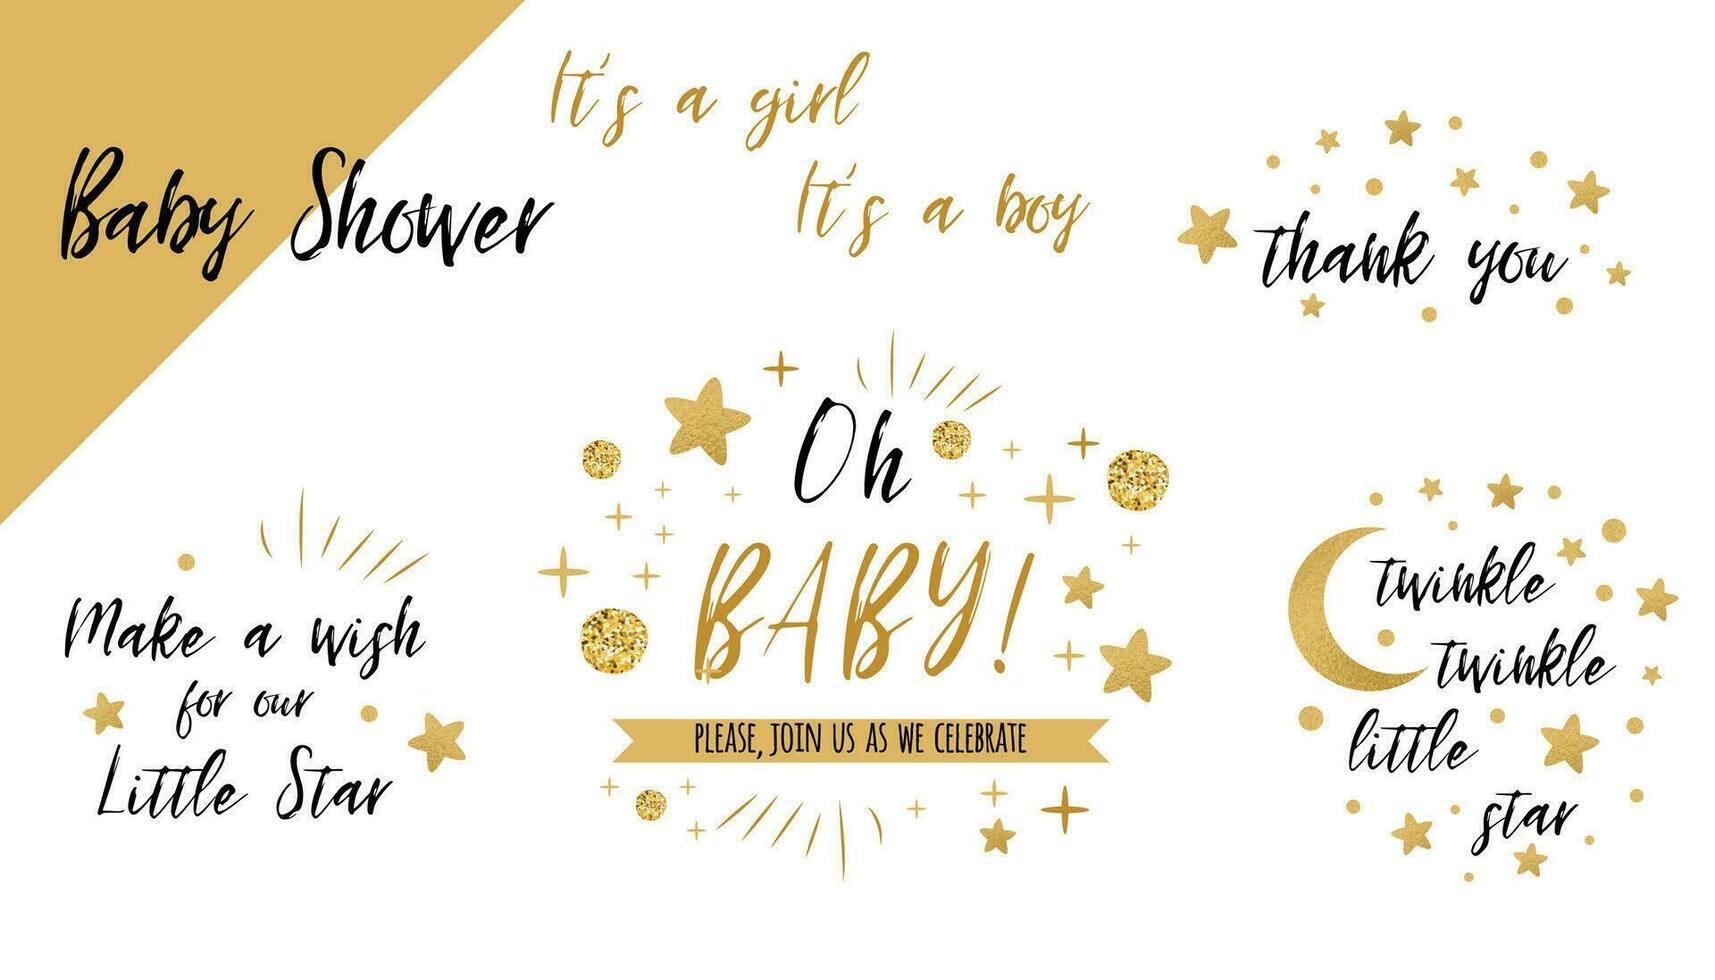 Baby shower set templates Twinkle twinkle little star text with cute gold stars Oh baby Thank you Banner for children birthday design, invitation, thank you card, wishes for baby Vector illustration.